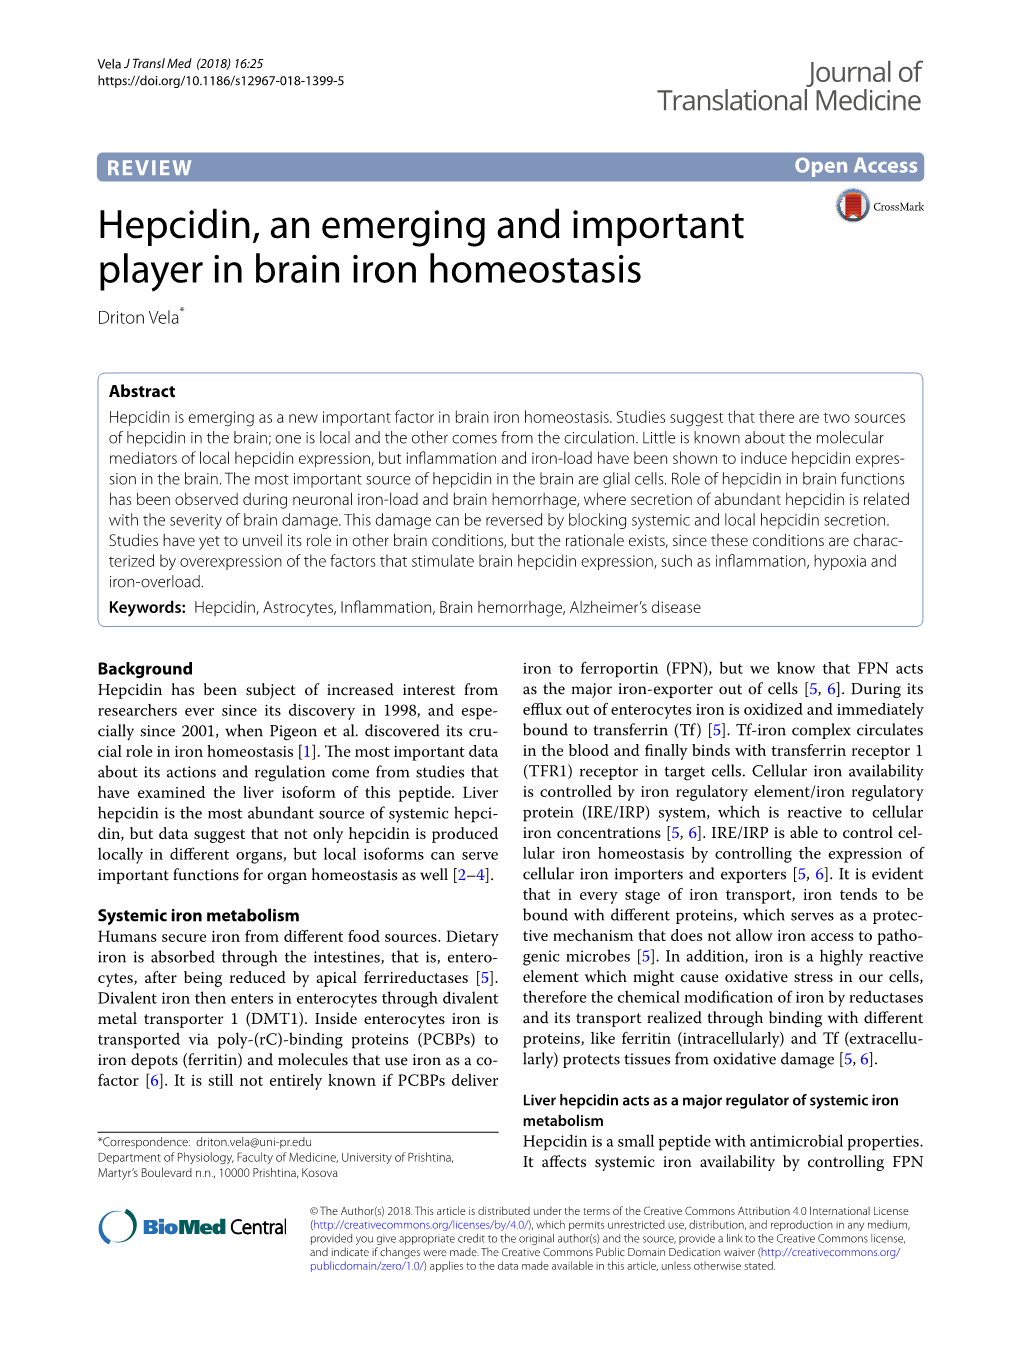 Hepcidin, an Emerging and Important Player in Brain Iron Homeostasis Driton Vela*